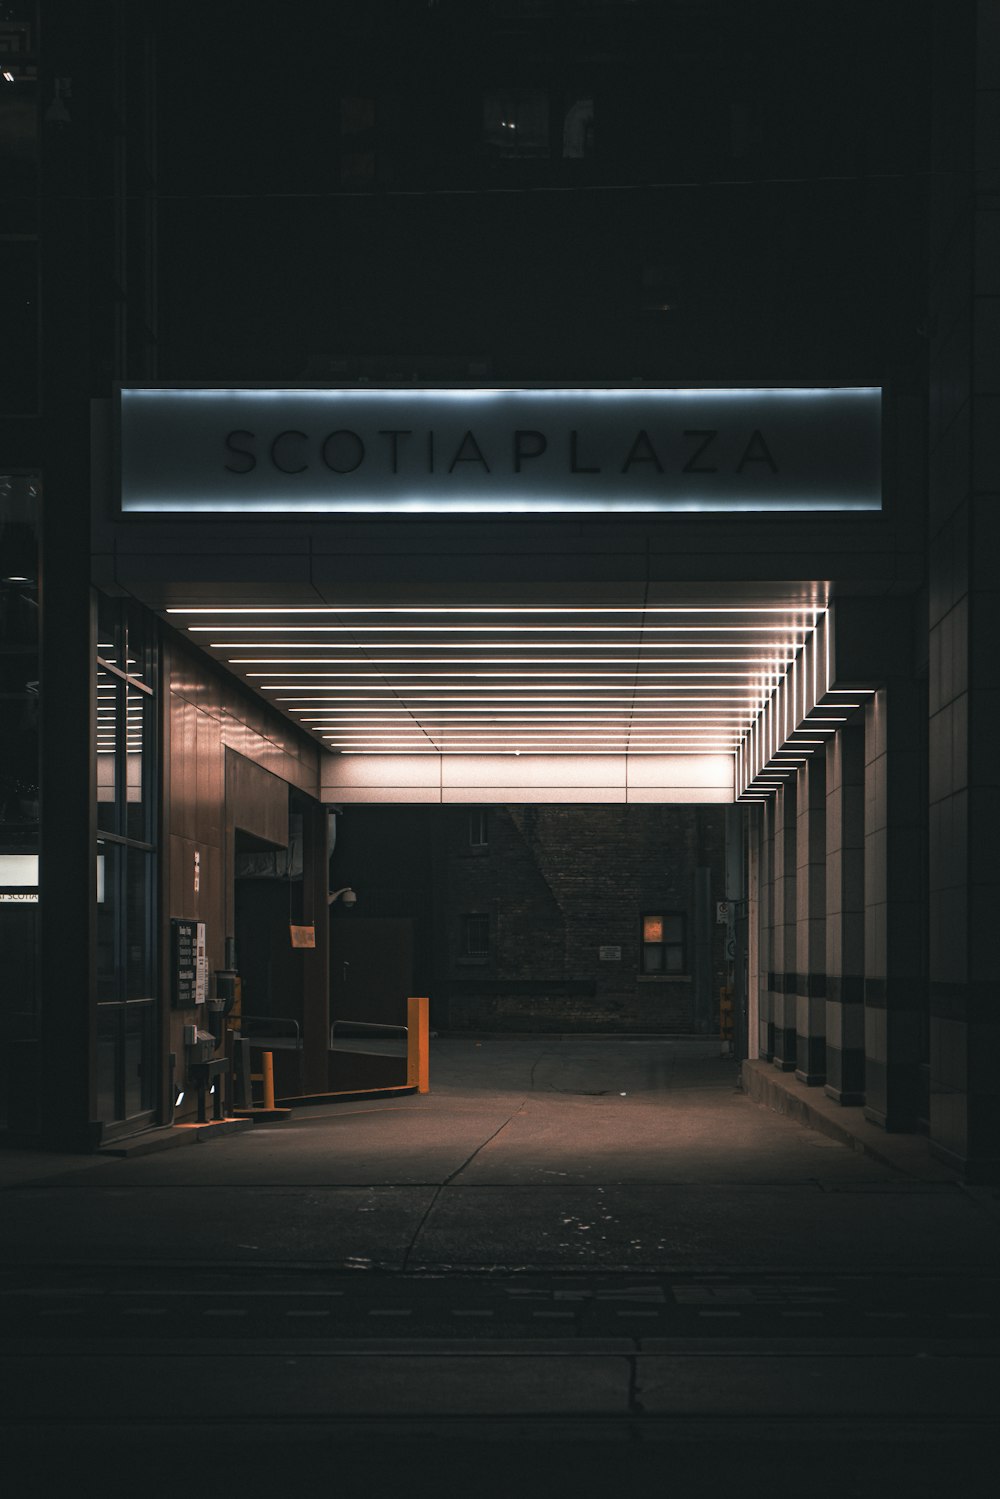 the entrance to a building lit up at night